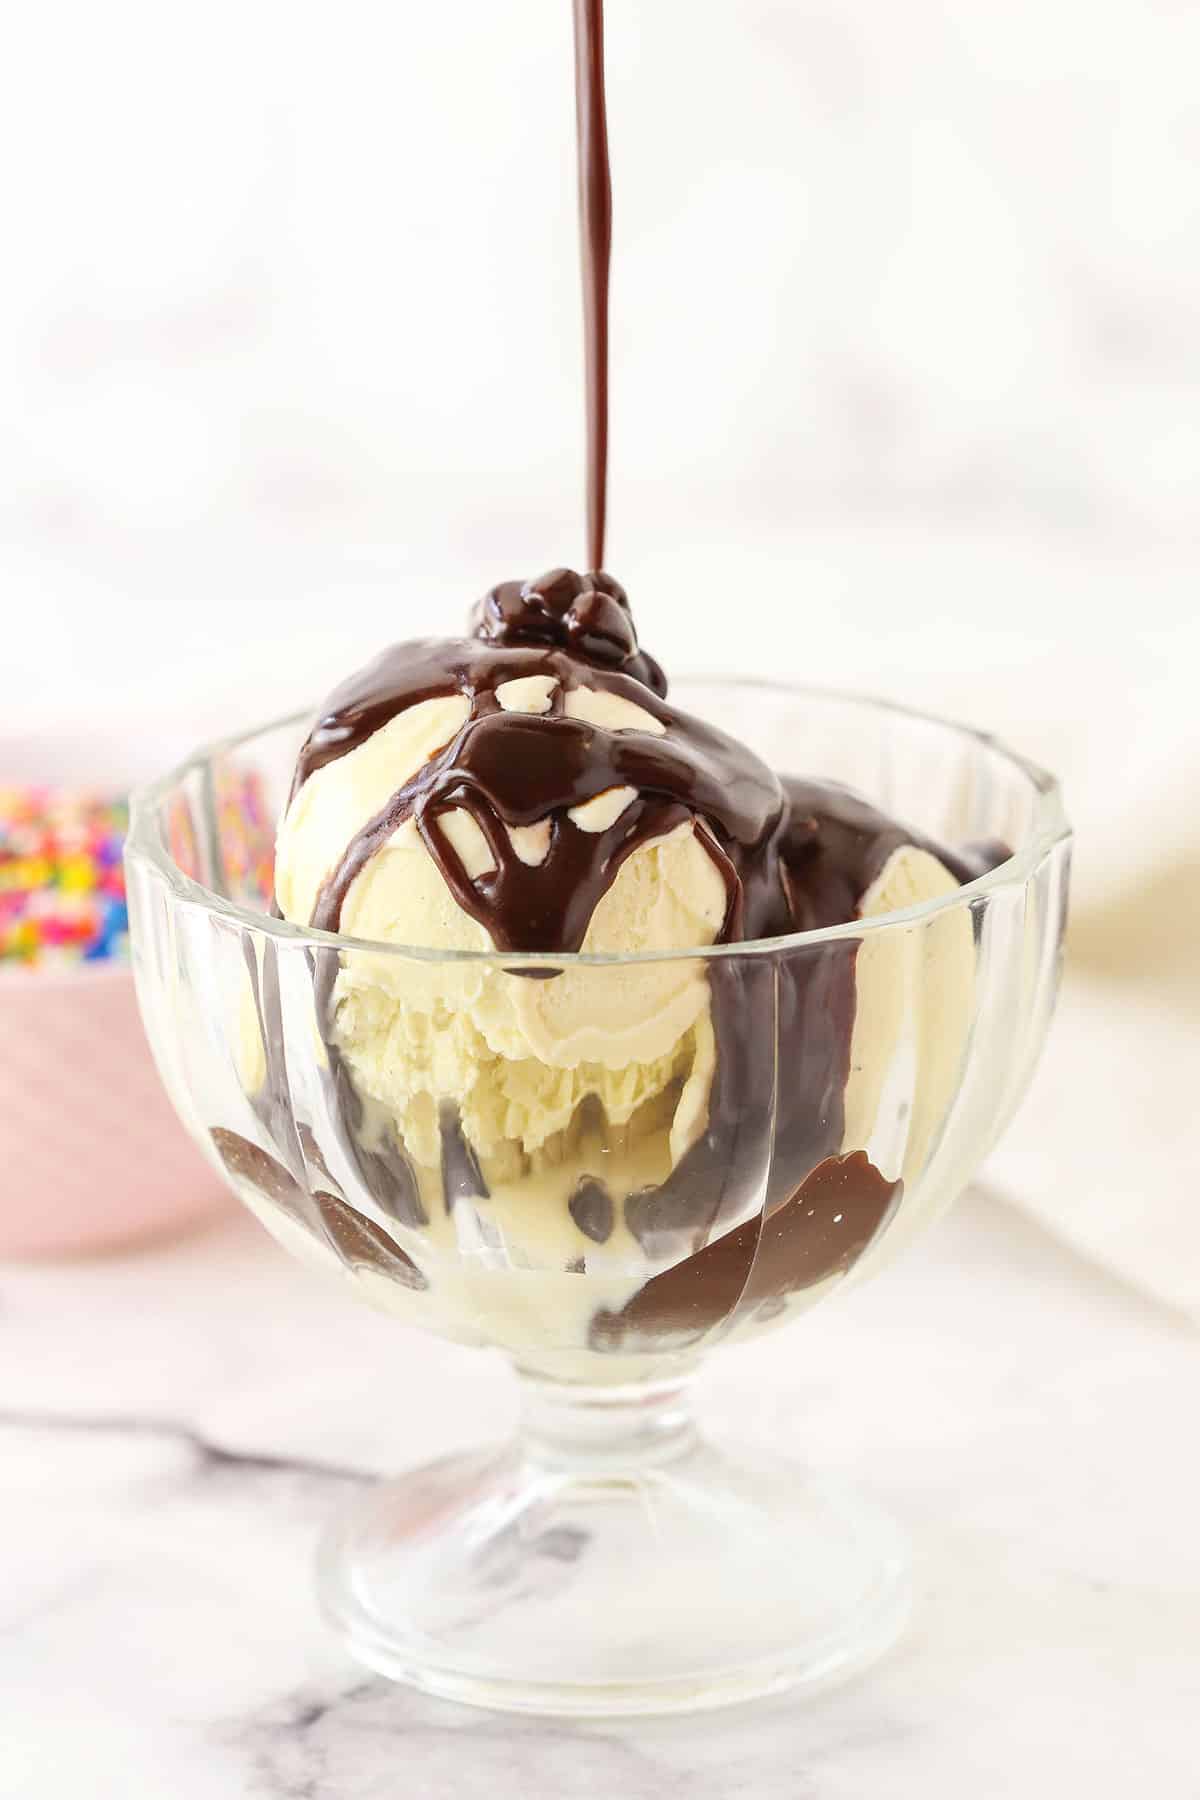 Homemade Hot Fudge Sauce being drizzled over three scoops of vanilla ice cream in a glass bowl with a spoon